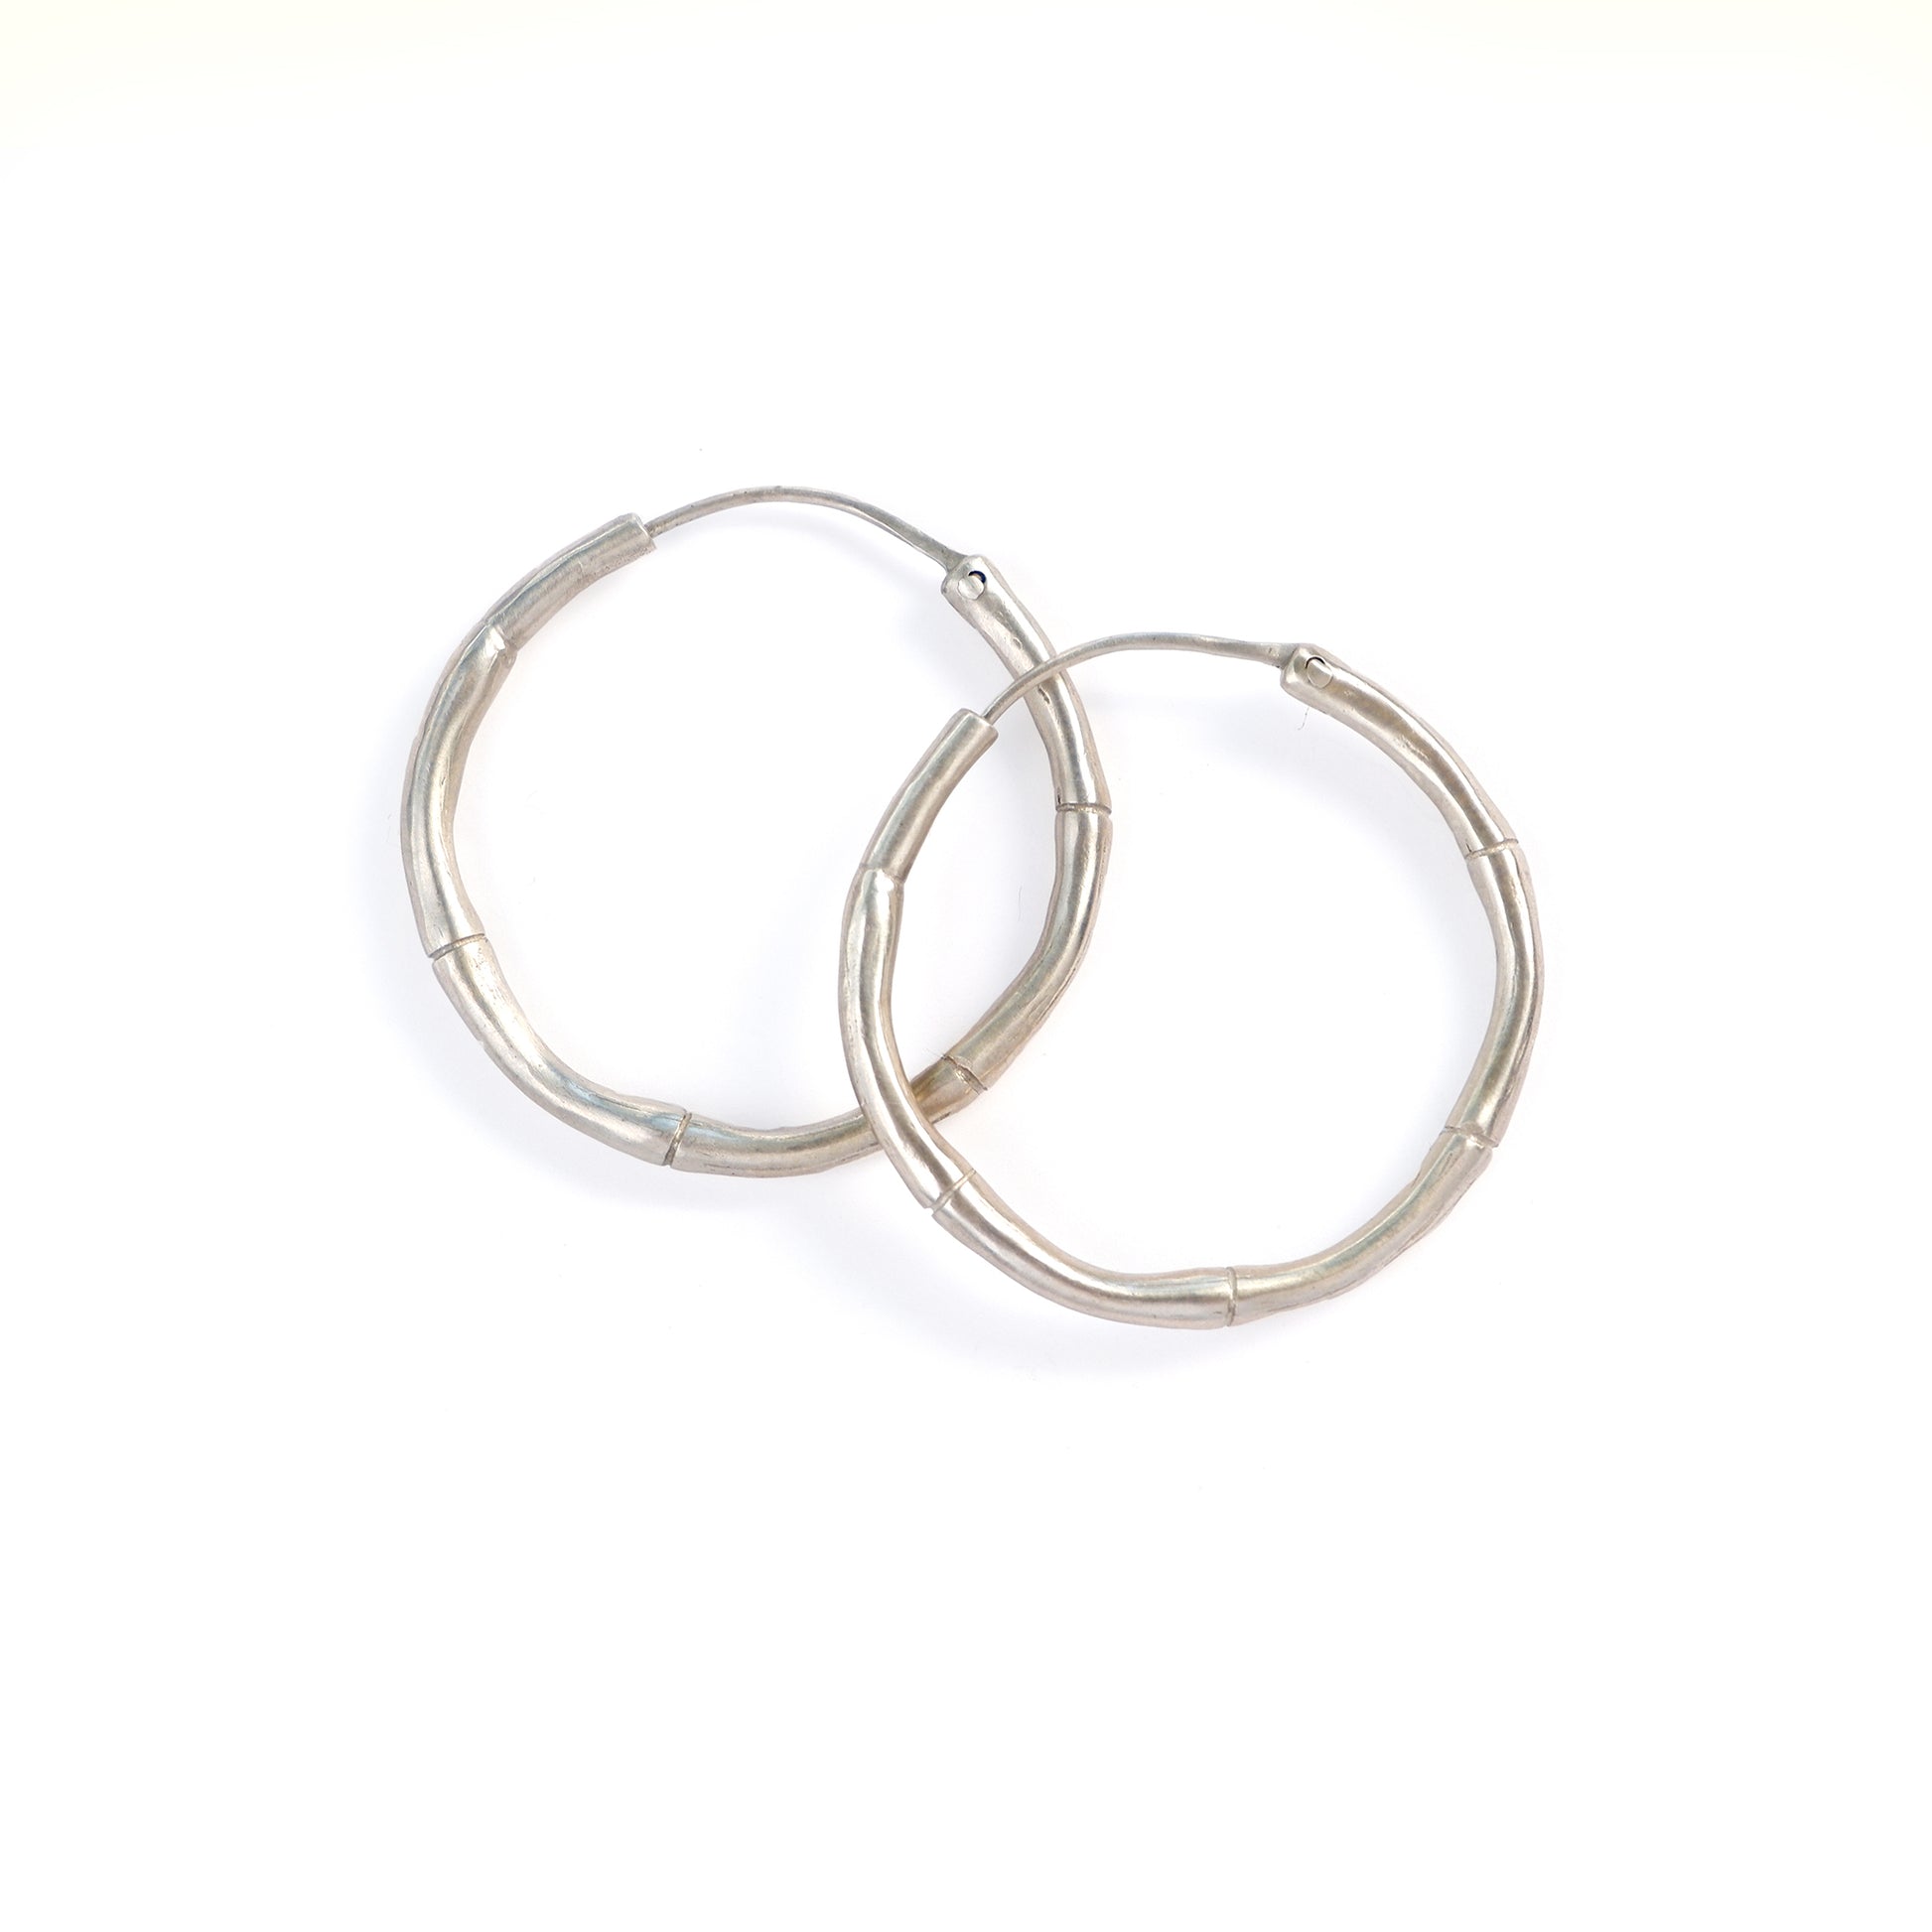 Bamboo Hoops small size, solid sterling silver hula hoops